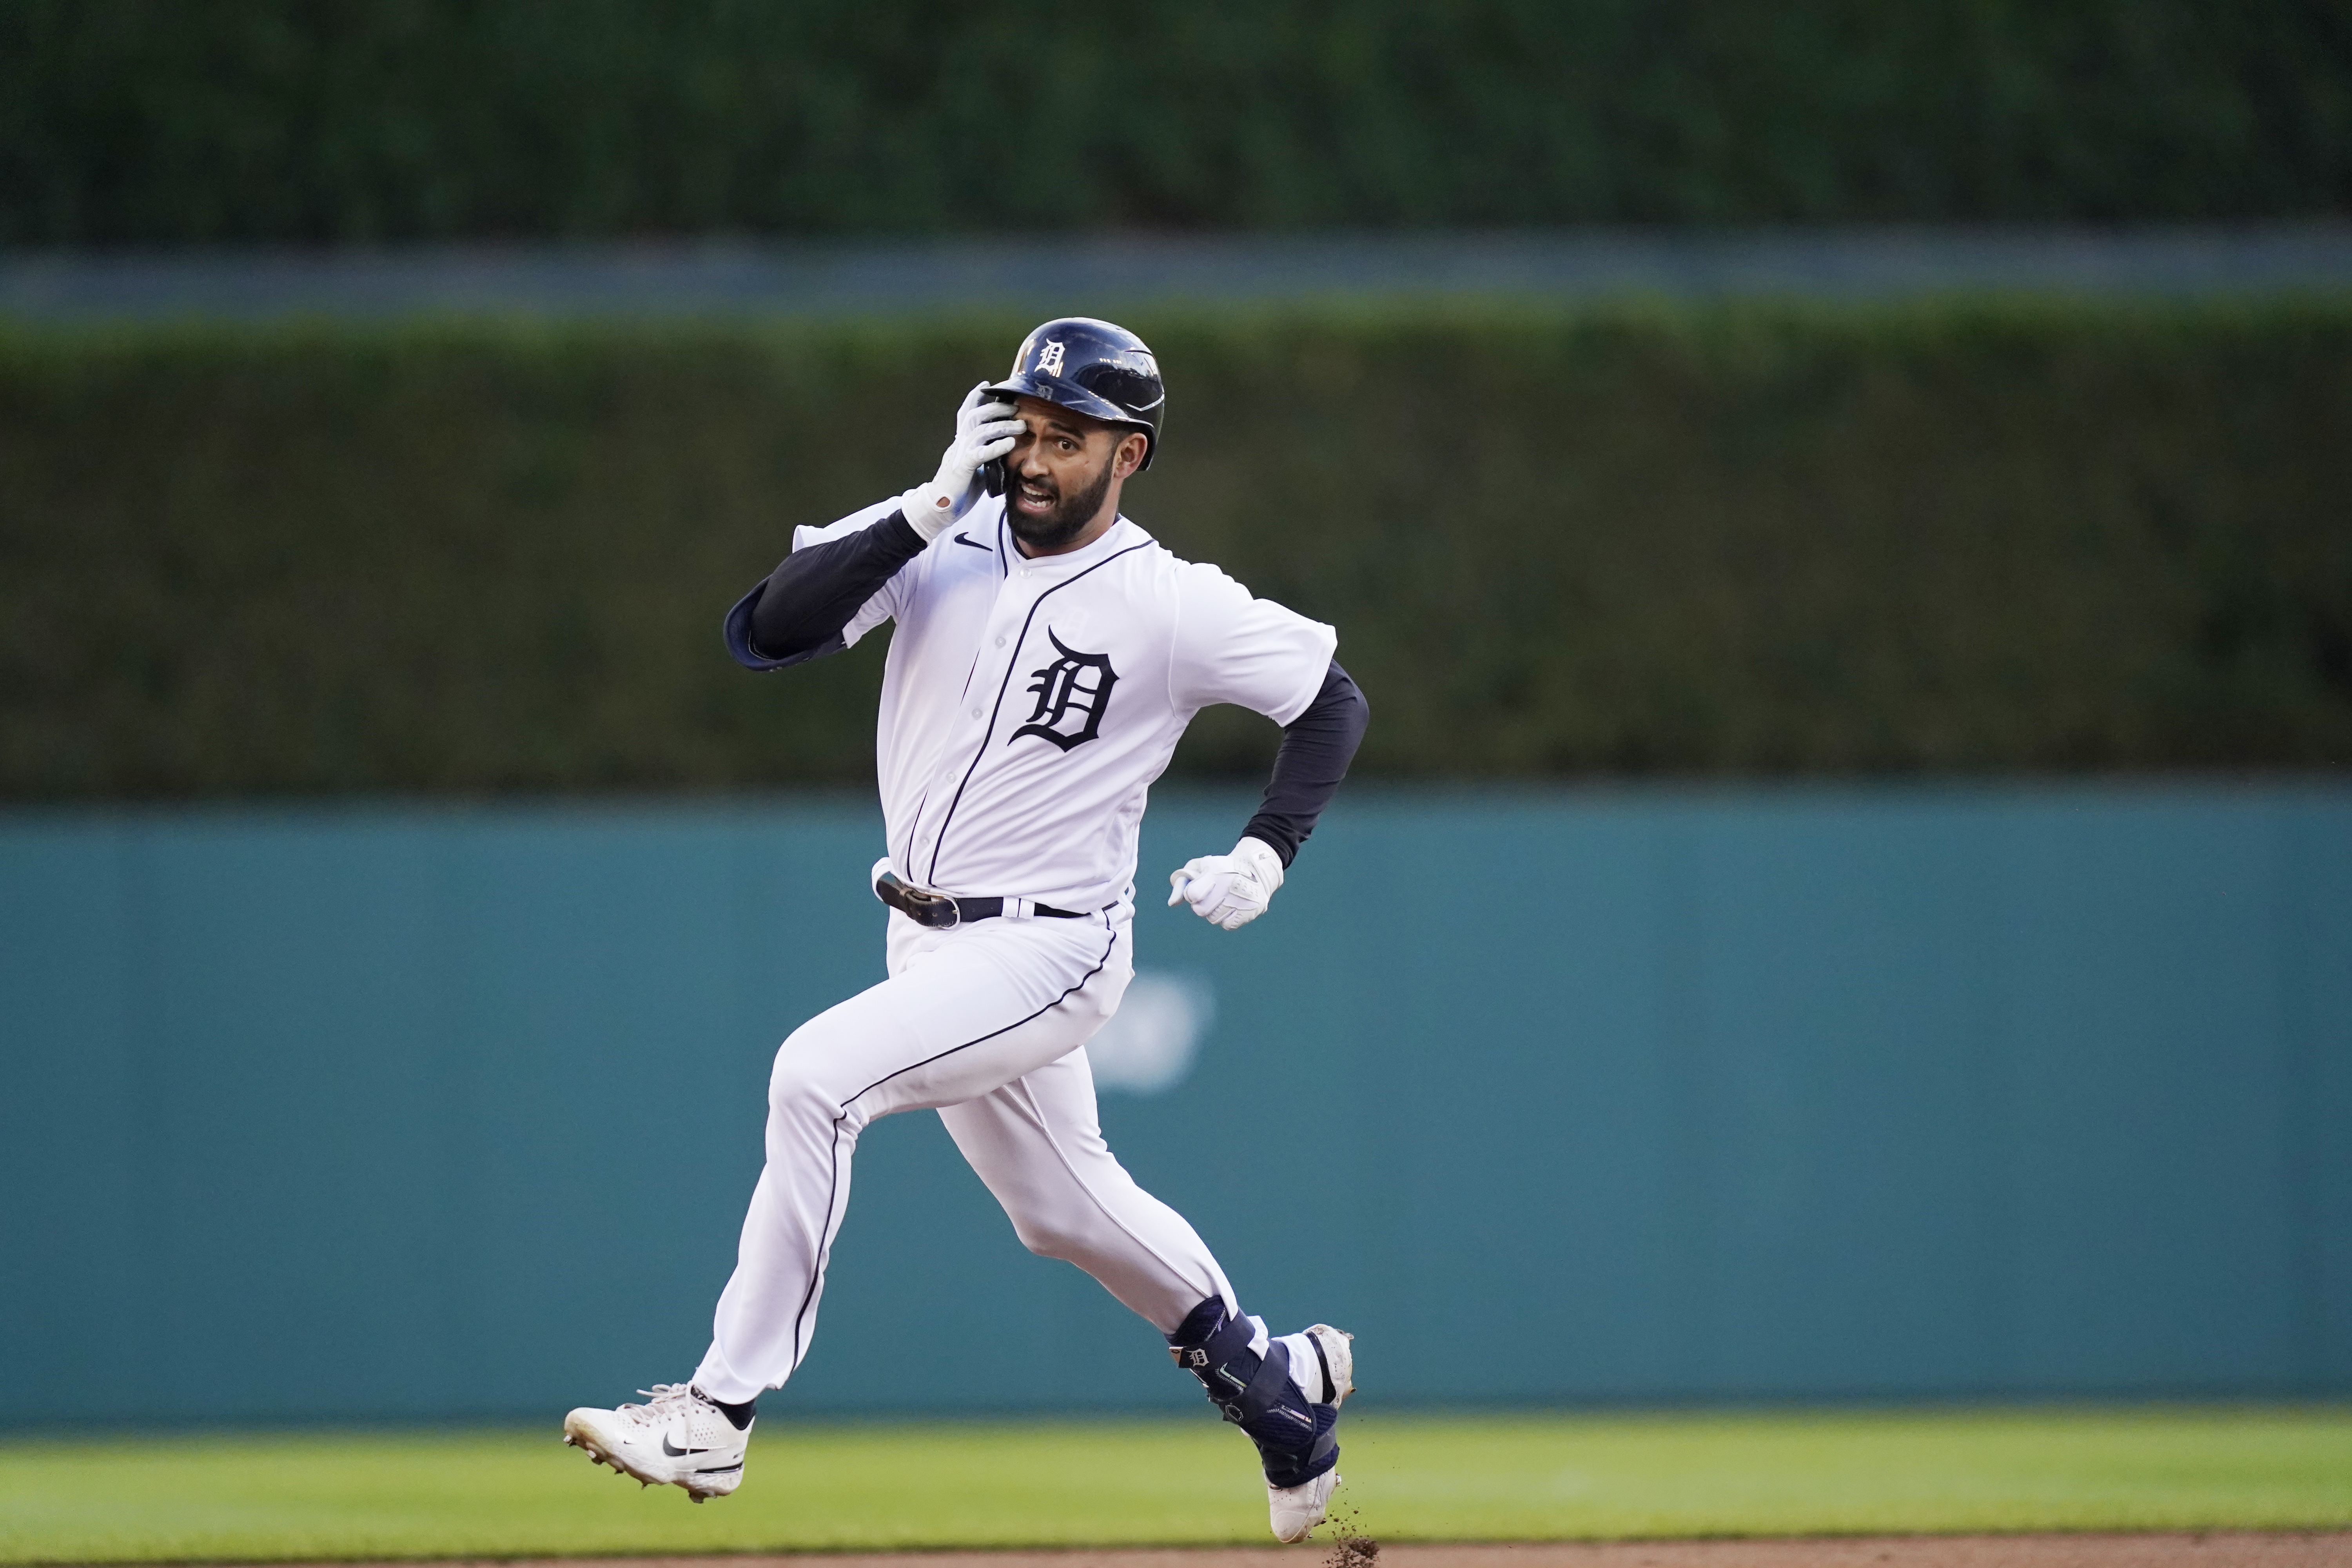 Tigers beat Twins 6-4 to take 3 of 4 in the series